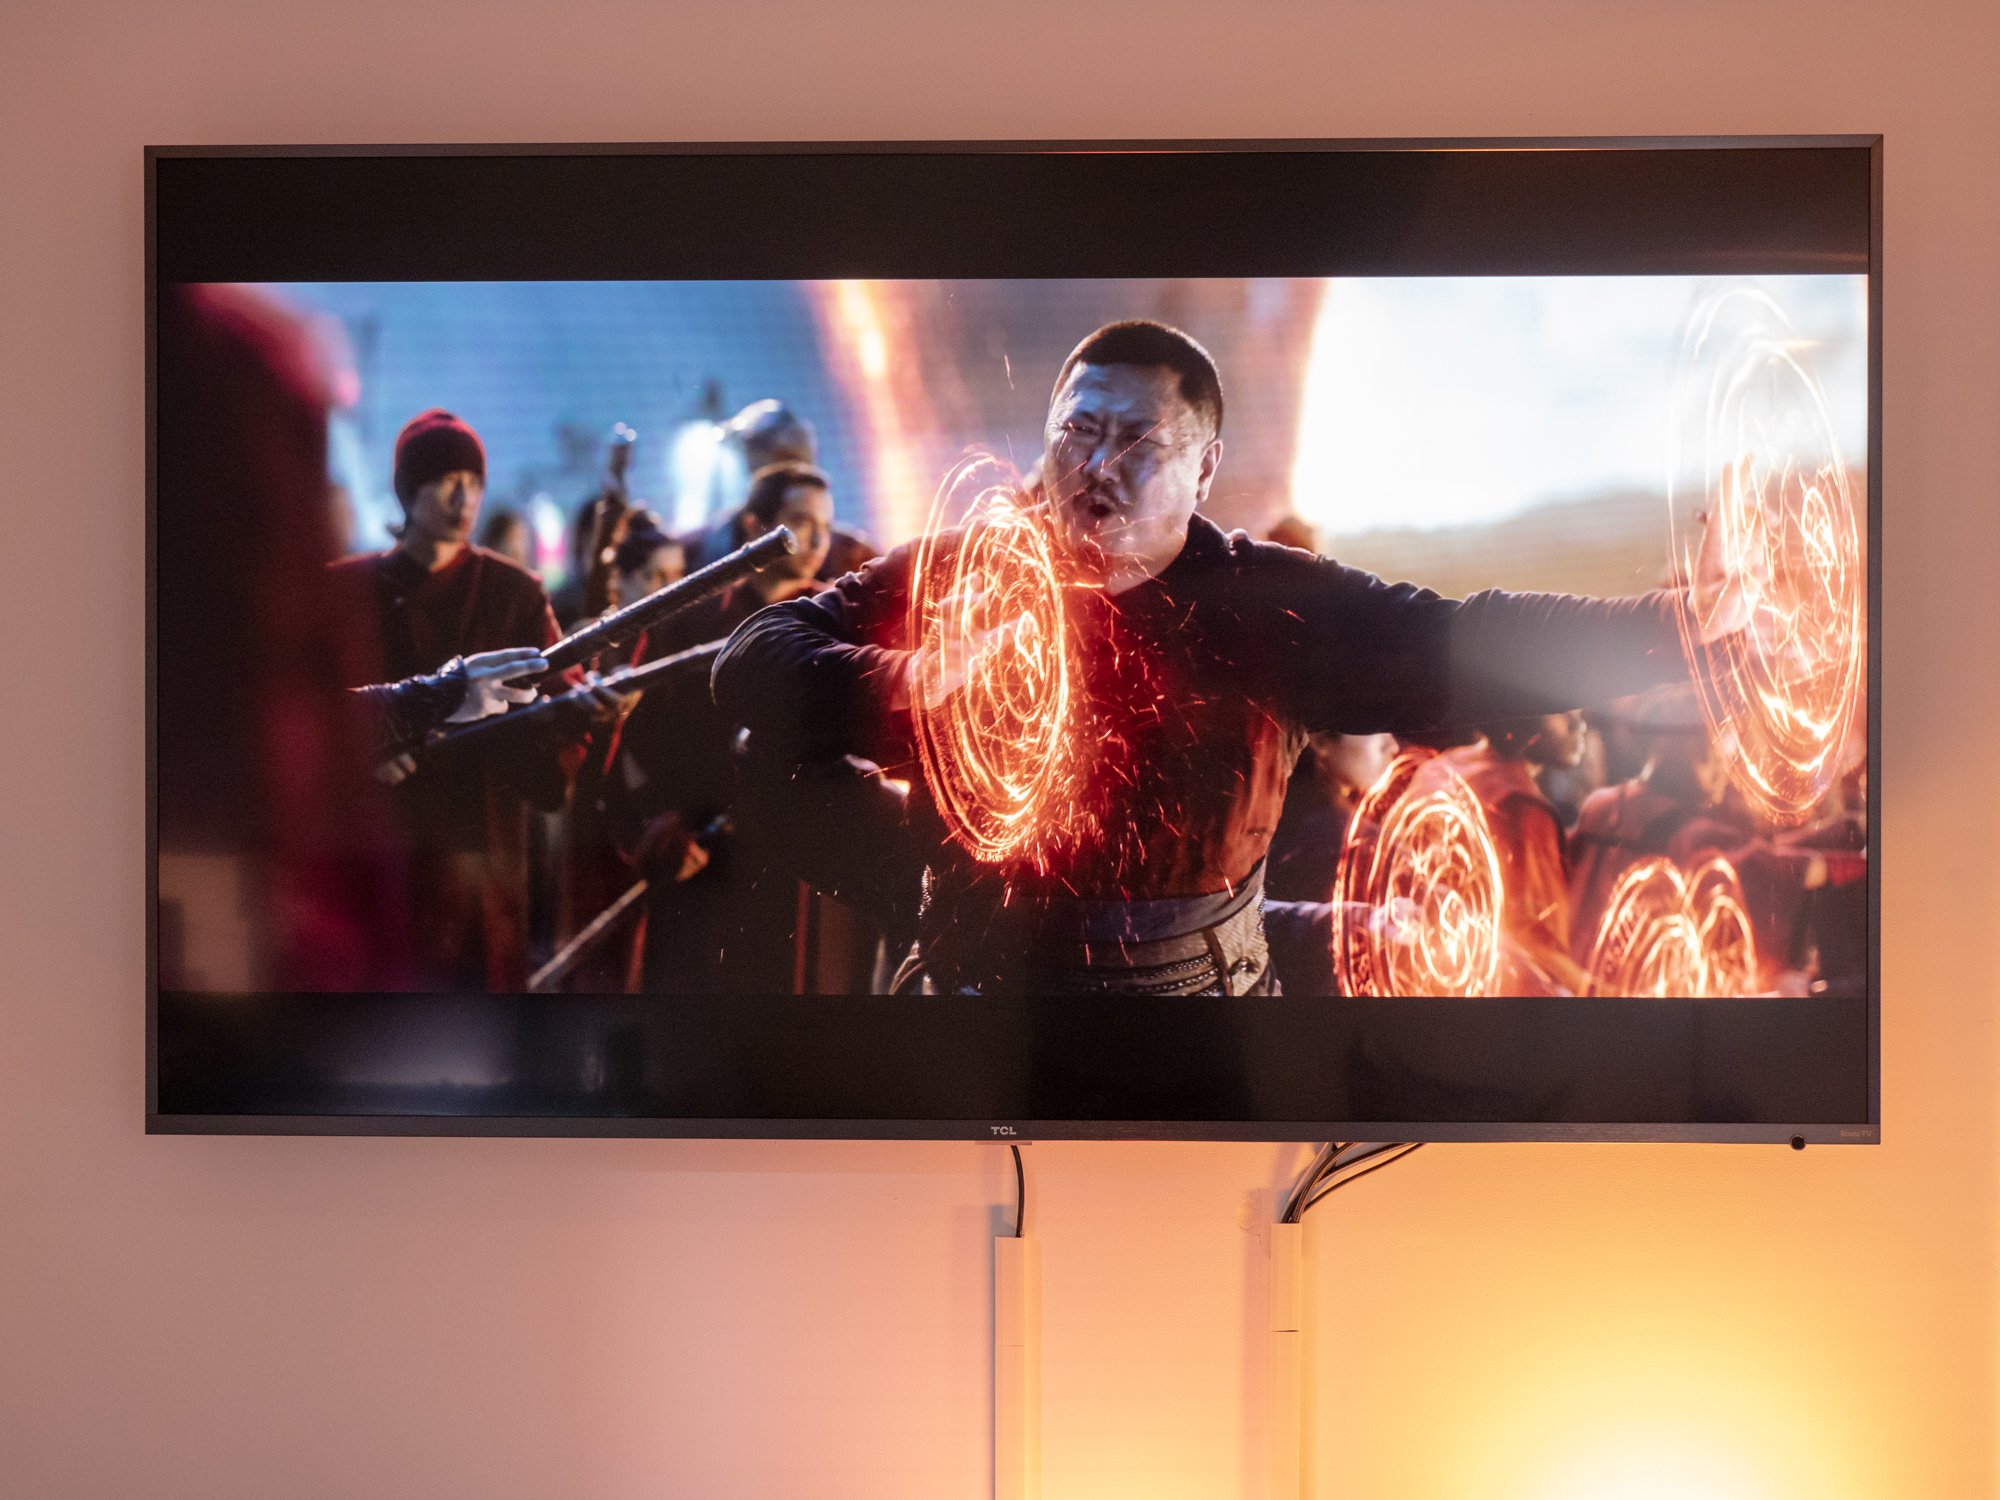 Philips Hue TV sync box now supports HDR10+ and Dolby Vision - The